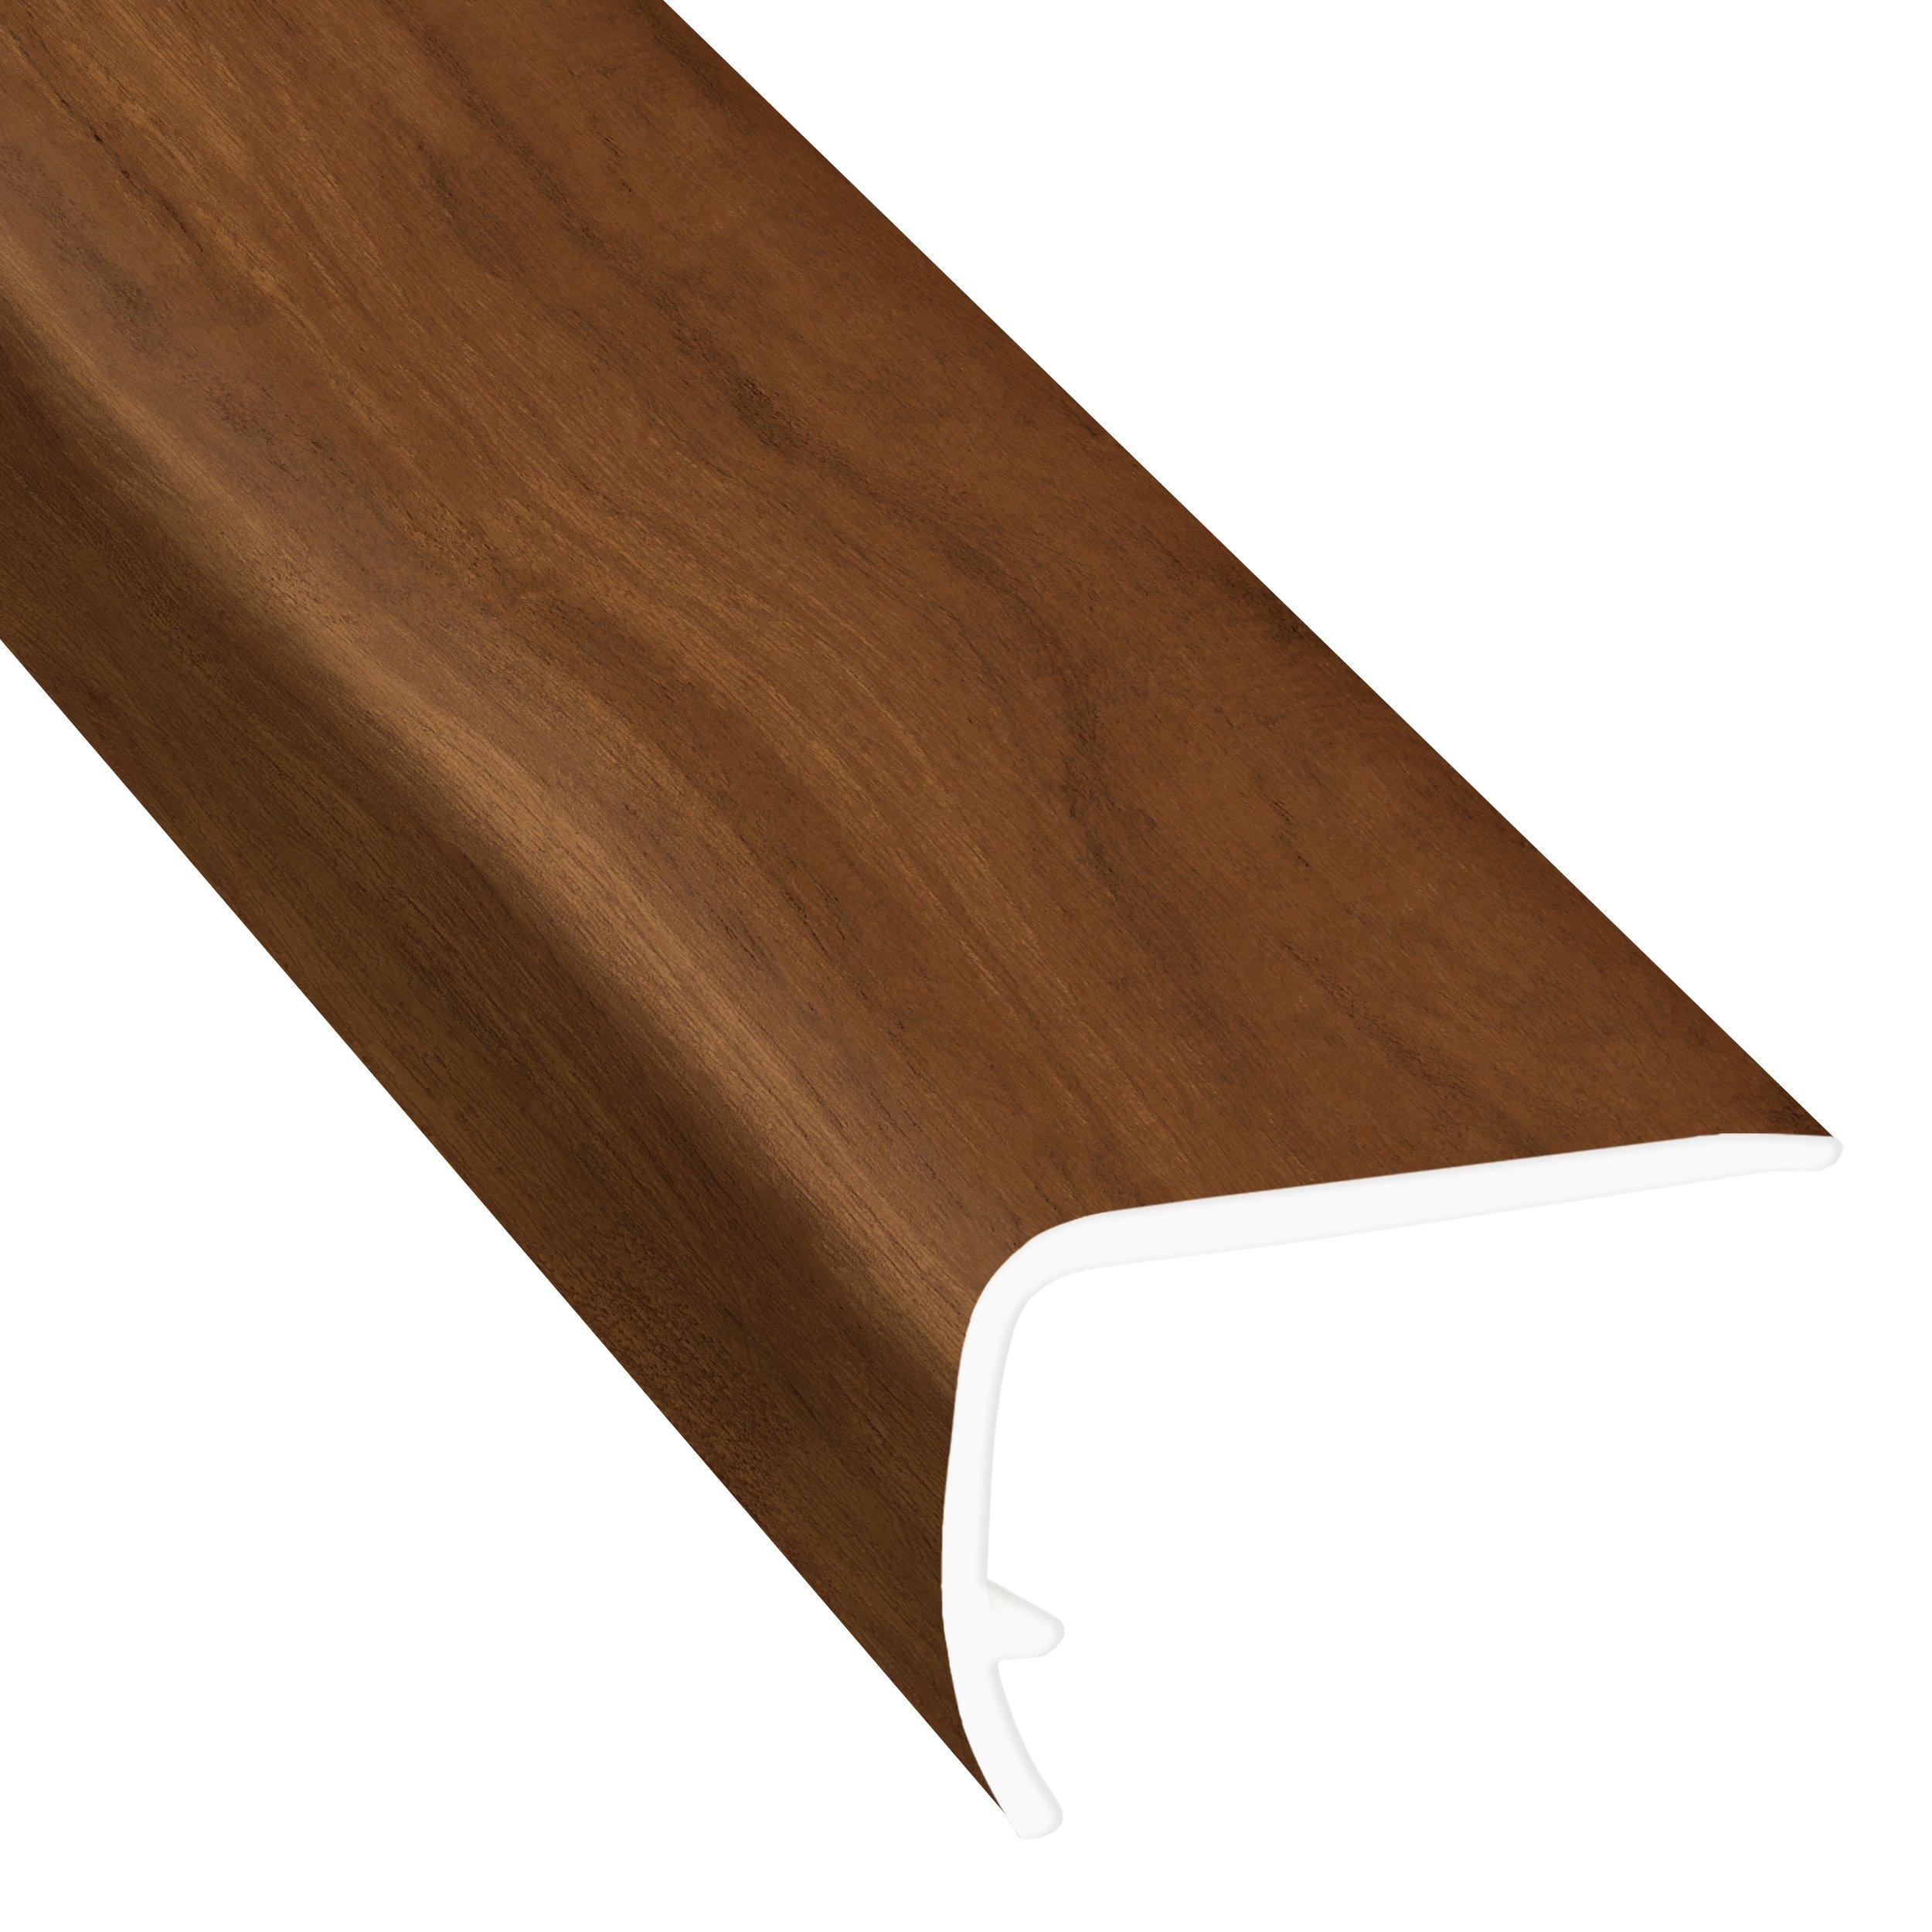 Elk Fawn 94in. Vinyl Overlapping Stair Nose